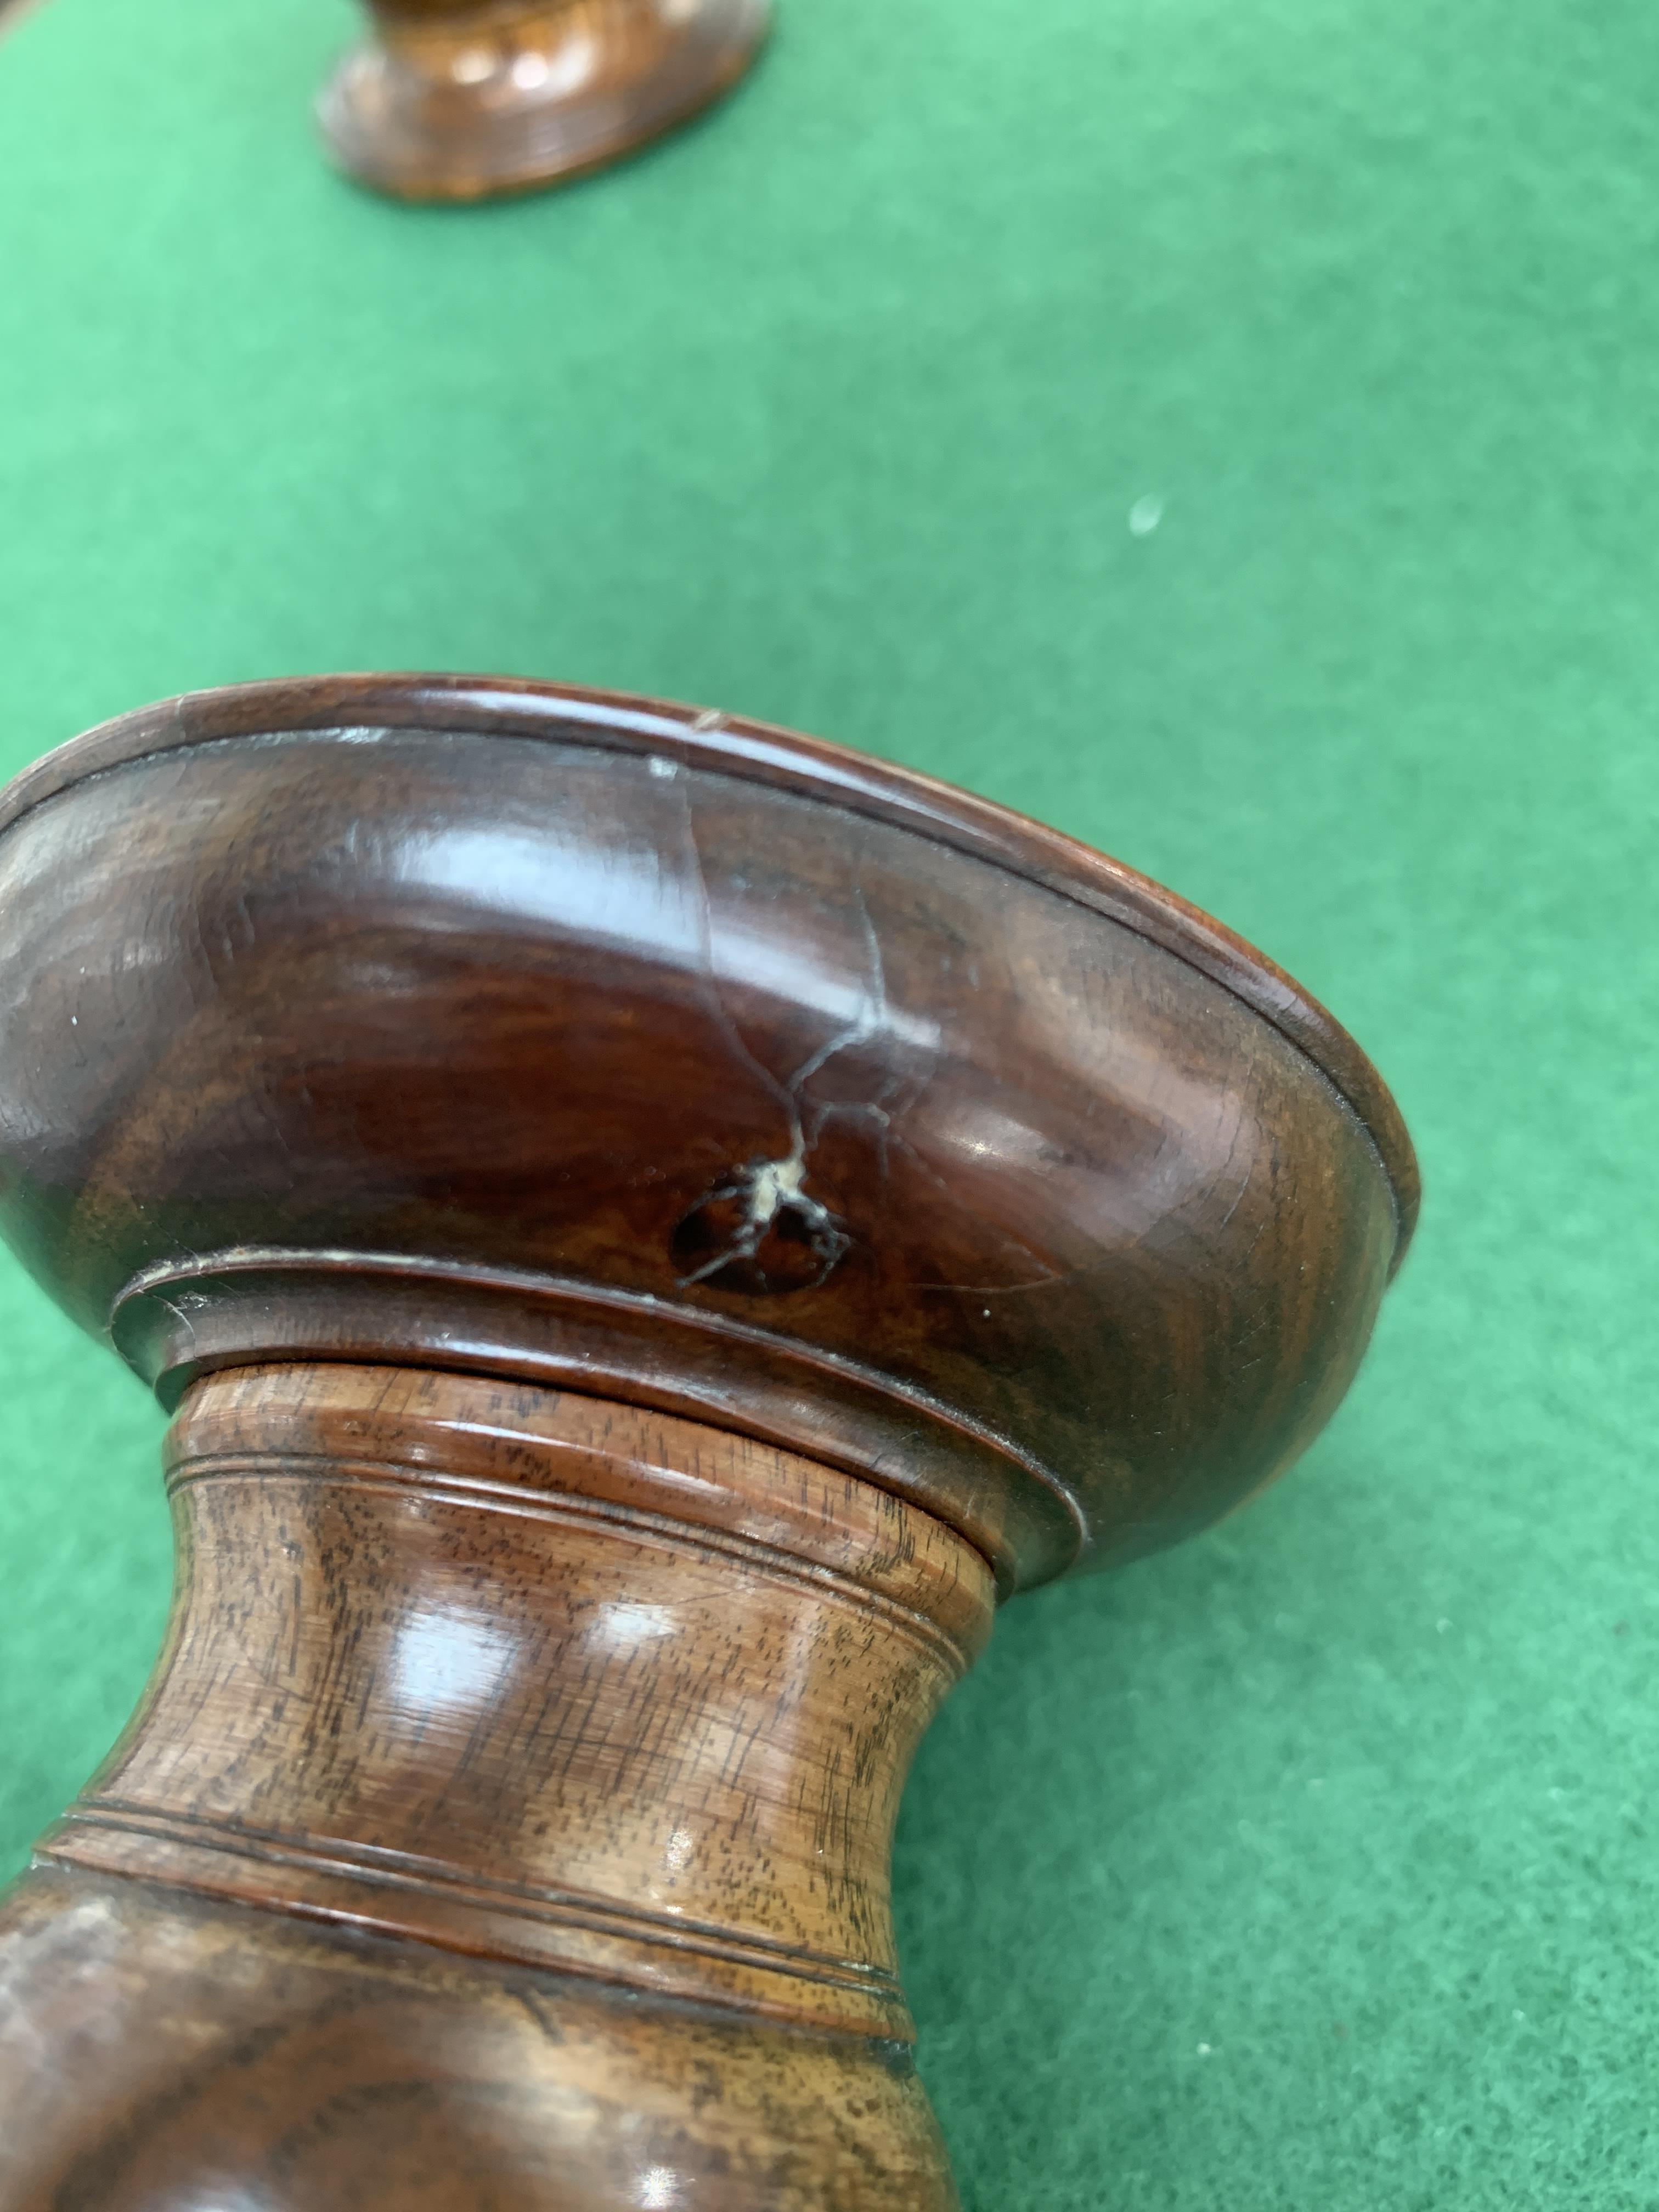 THREE TREEN LIGNUM VITAE POUNCE POTS LATE 18TH / EARLY 19TH CENTURY each with a flared pierced - Image 8 of 18